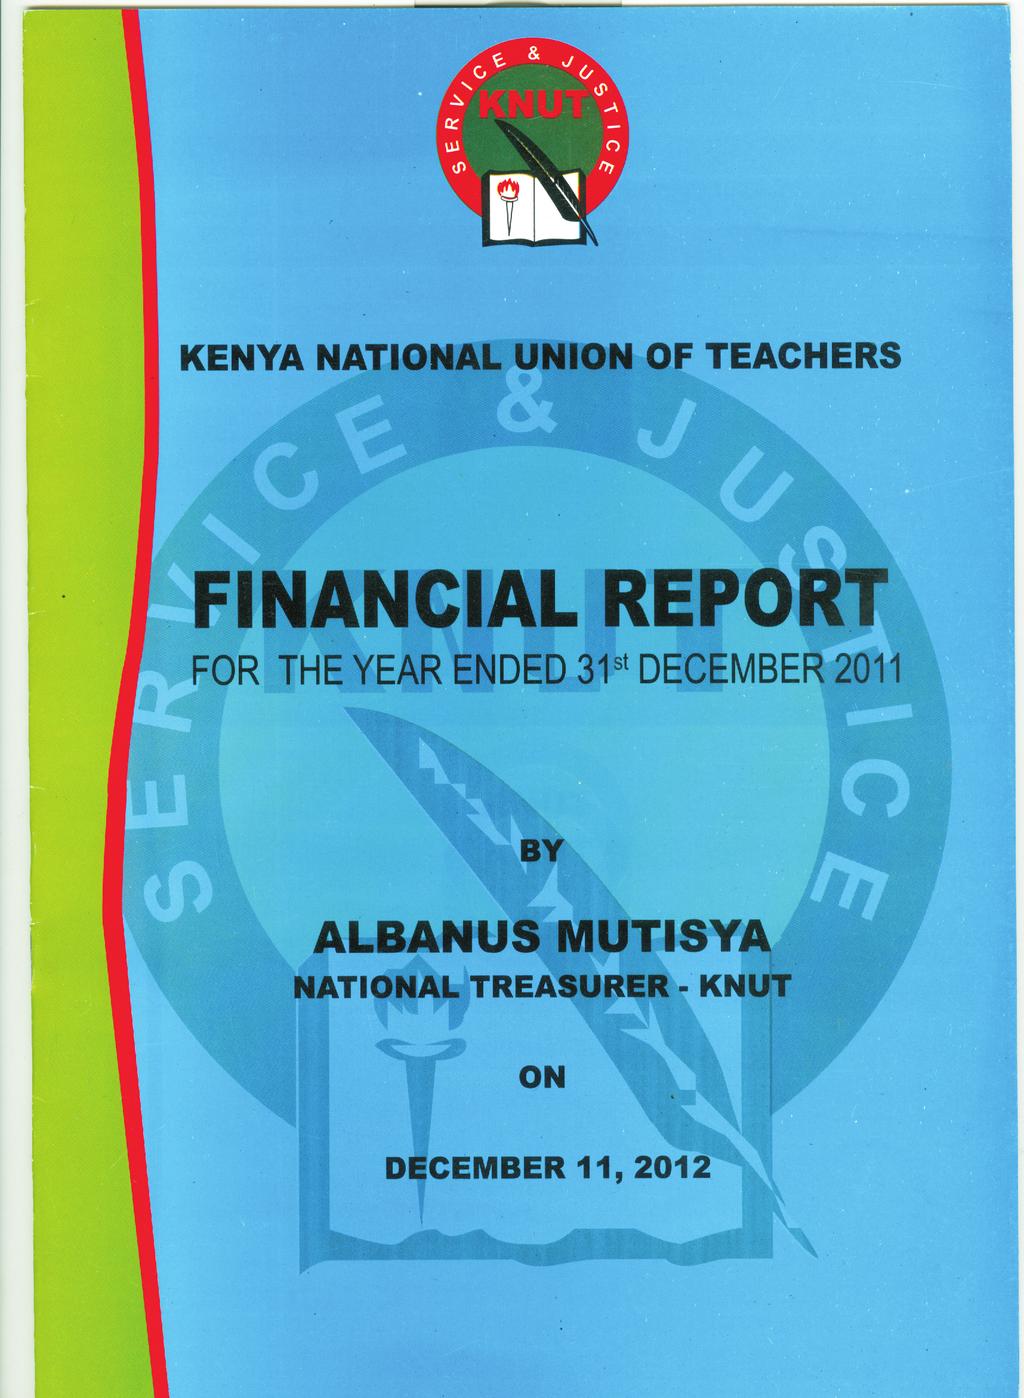 KNUT THE REPORT OF THE NATIONAL EXECUTIVE COUNCIL OF THE KENYA NATIONAL UNION OF TEACHERS PRESENTED BY: MR.